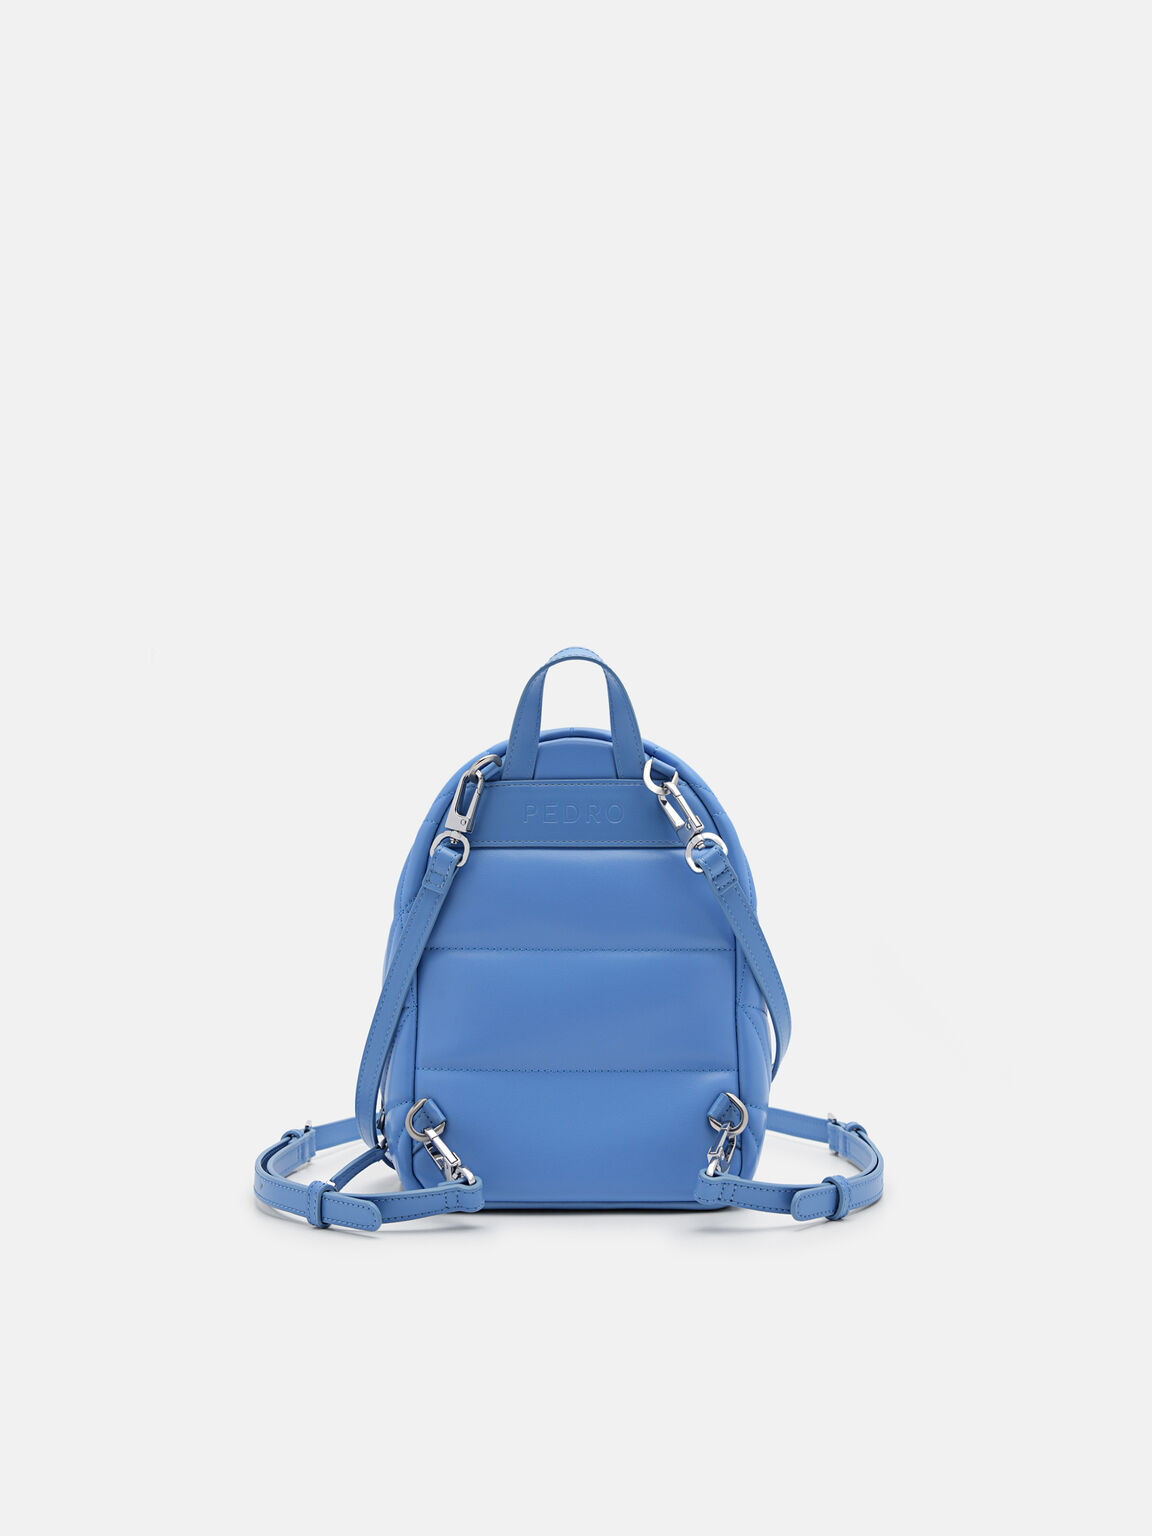 PEDRO Icon Mini Backpack in Pixel, Blue, hi-res